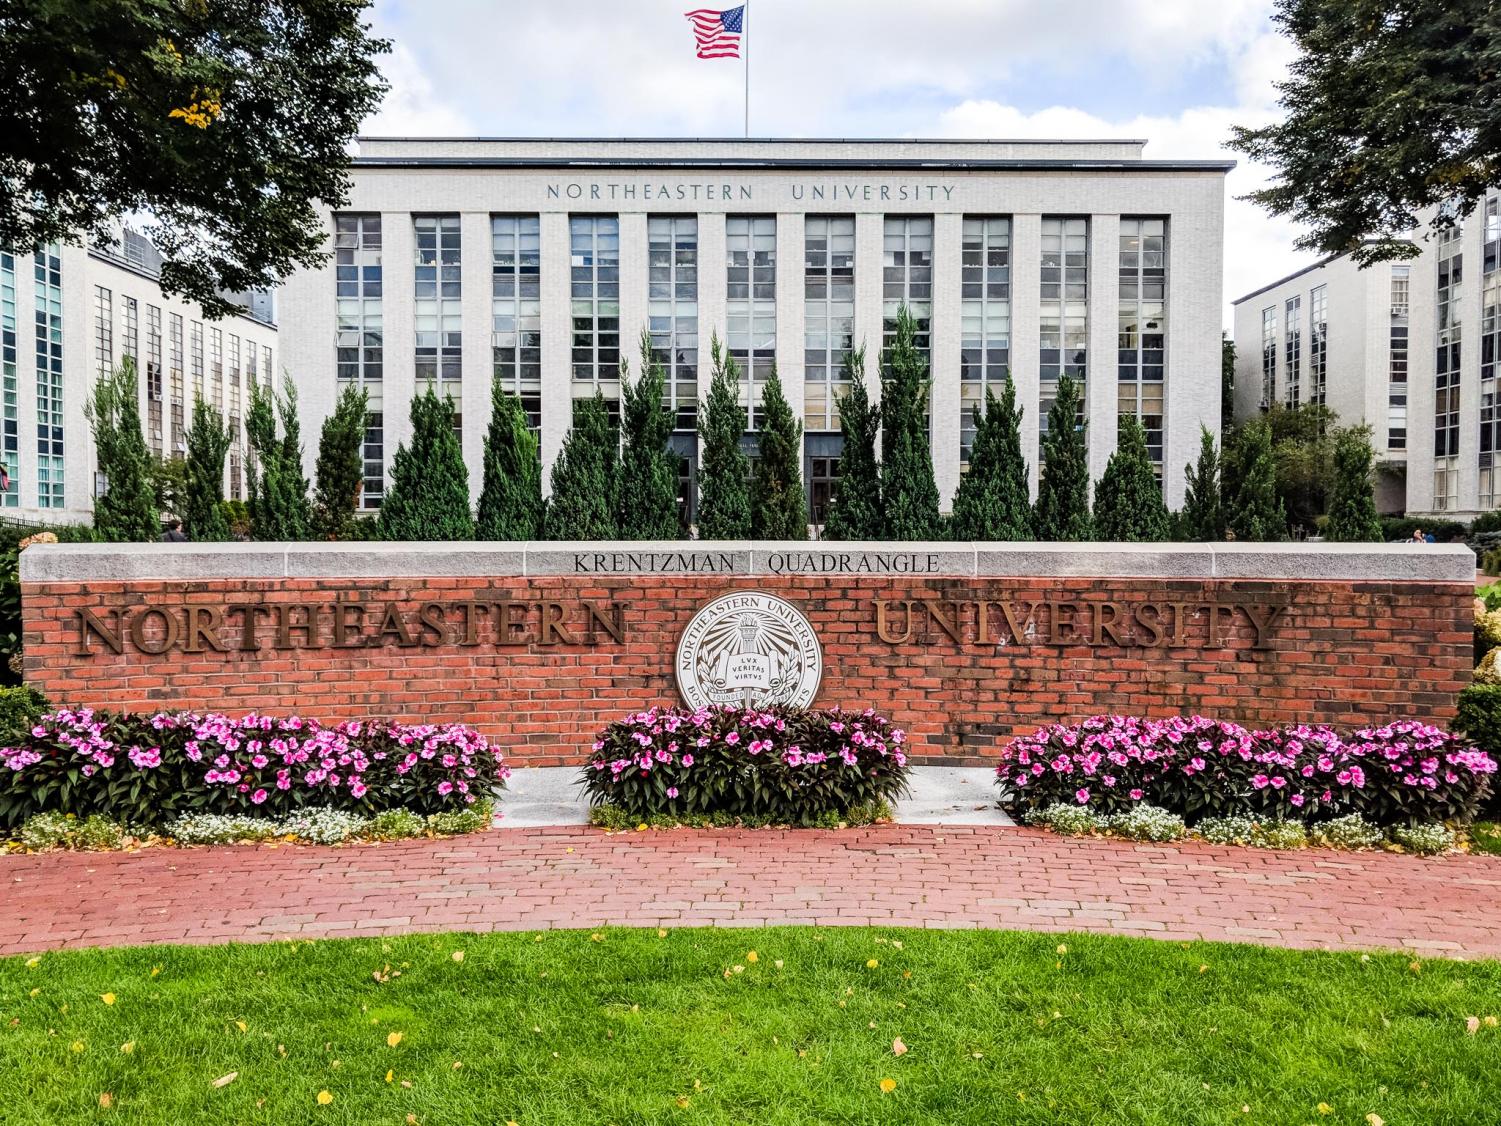 Northeastern to open campus near D.C. The Huntington News